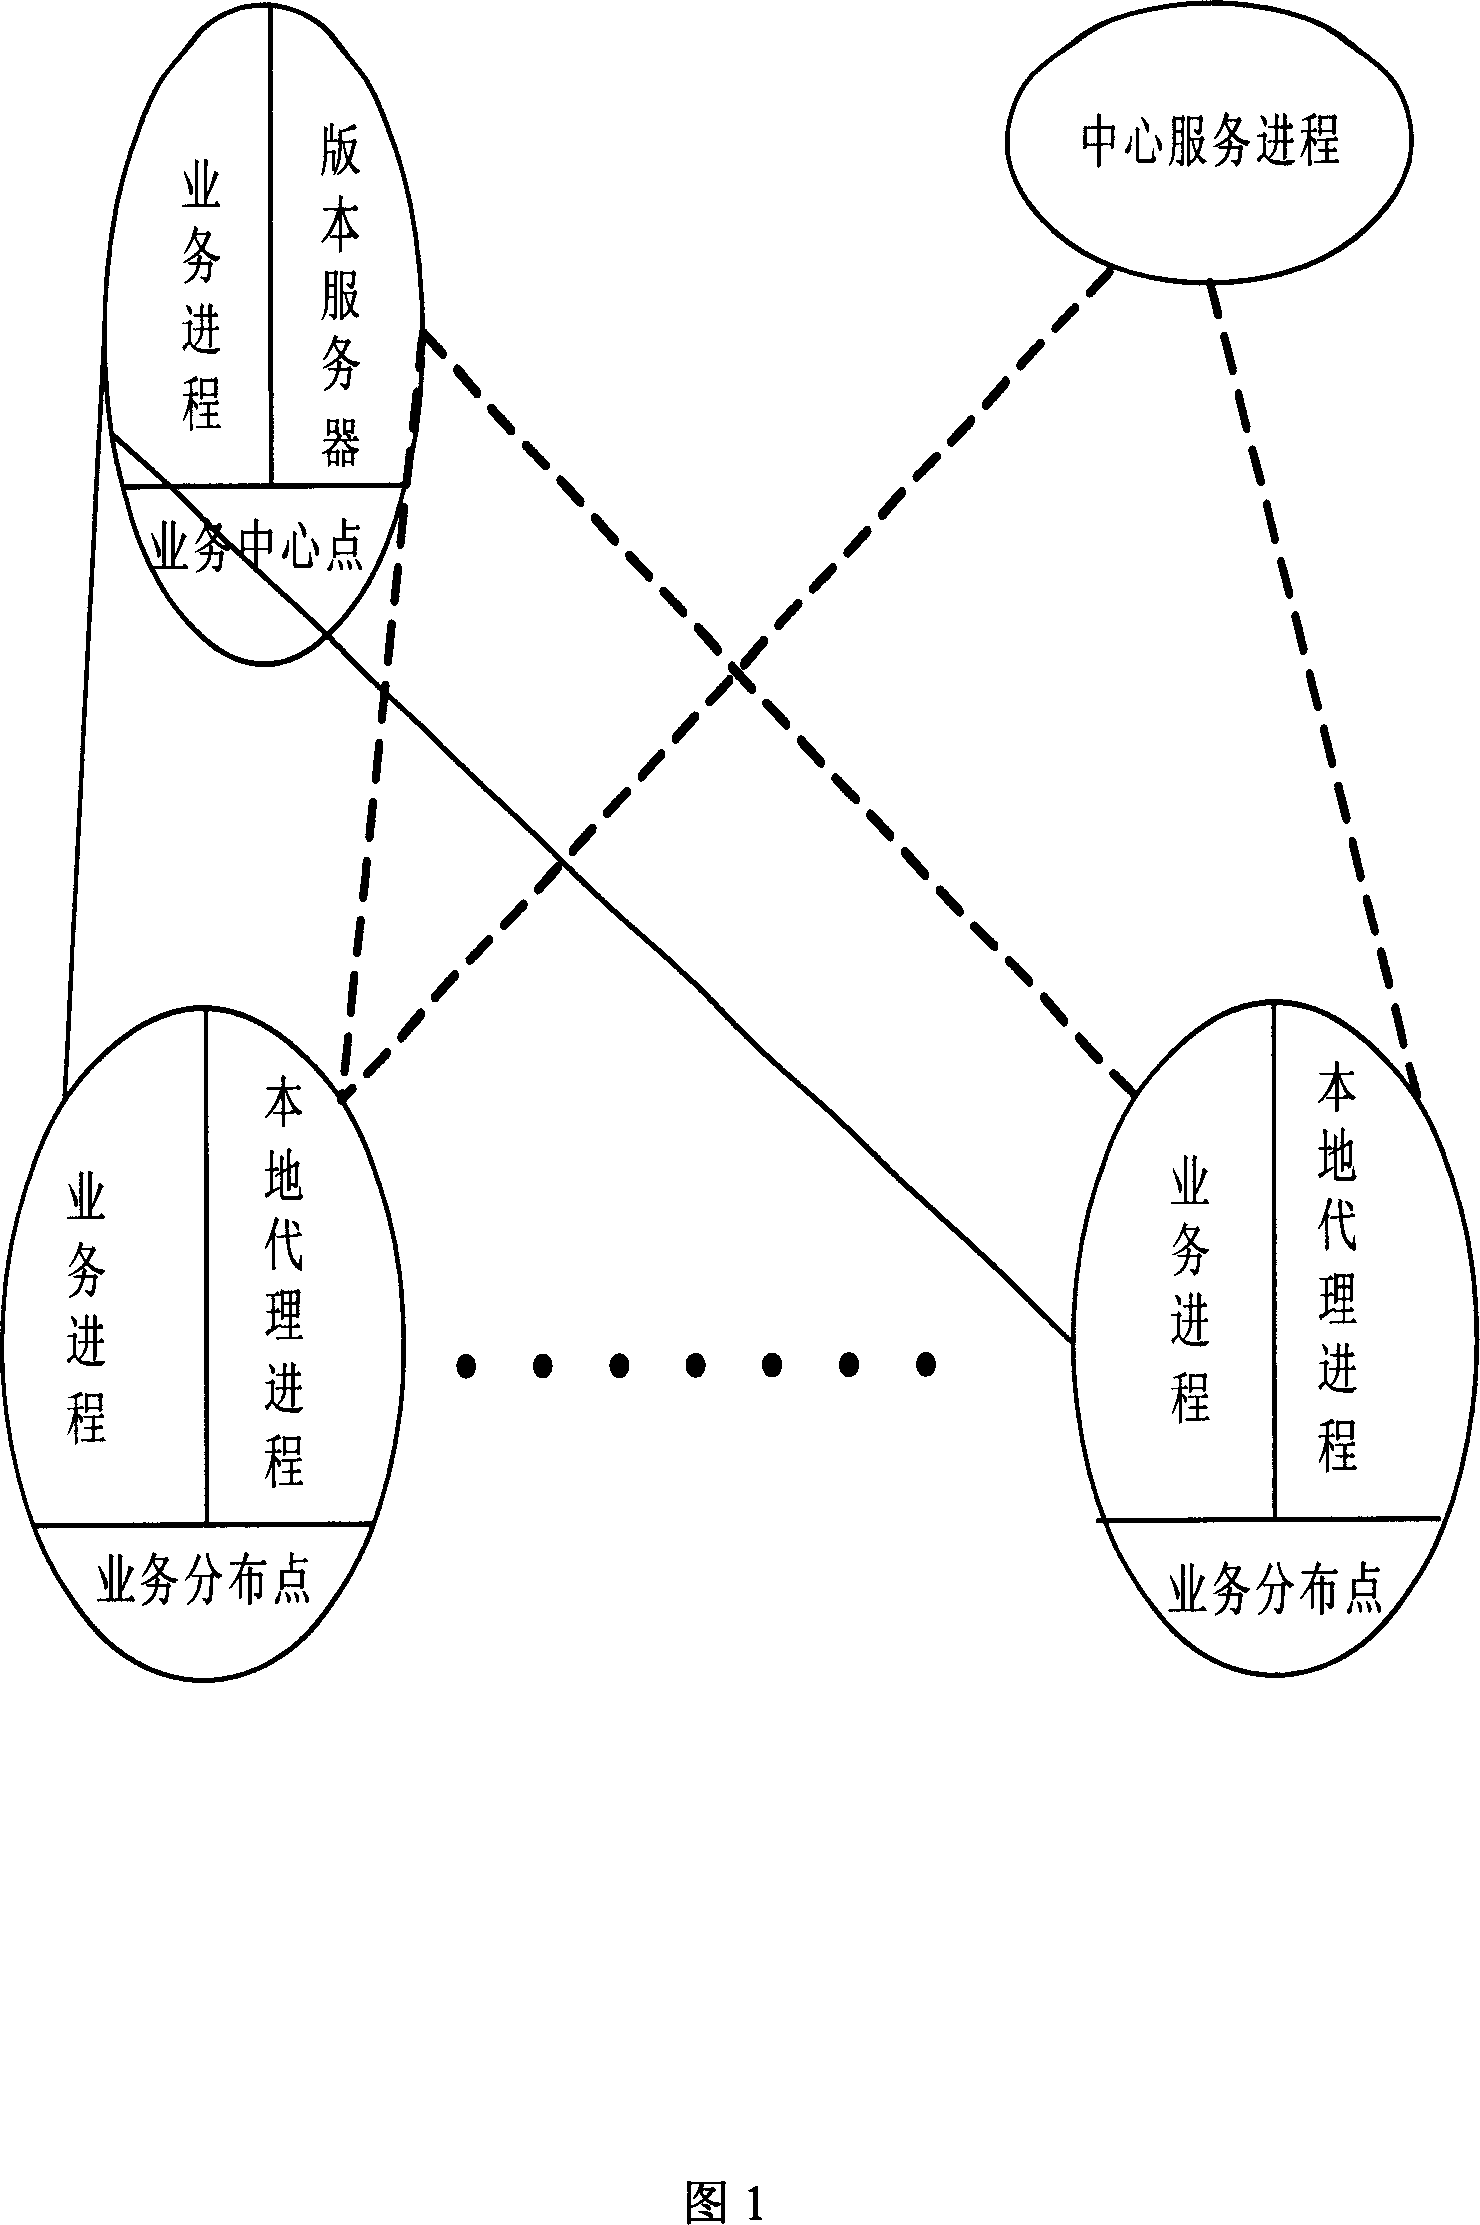 Distributed type software system disposition method